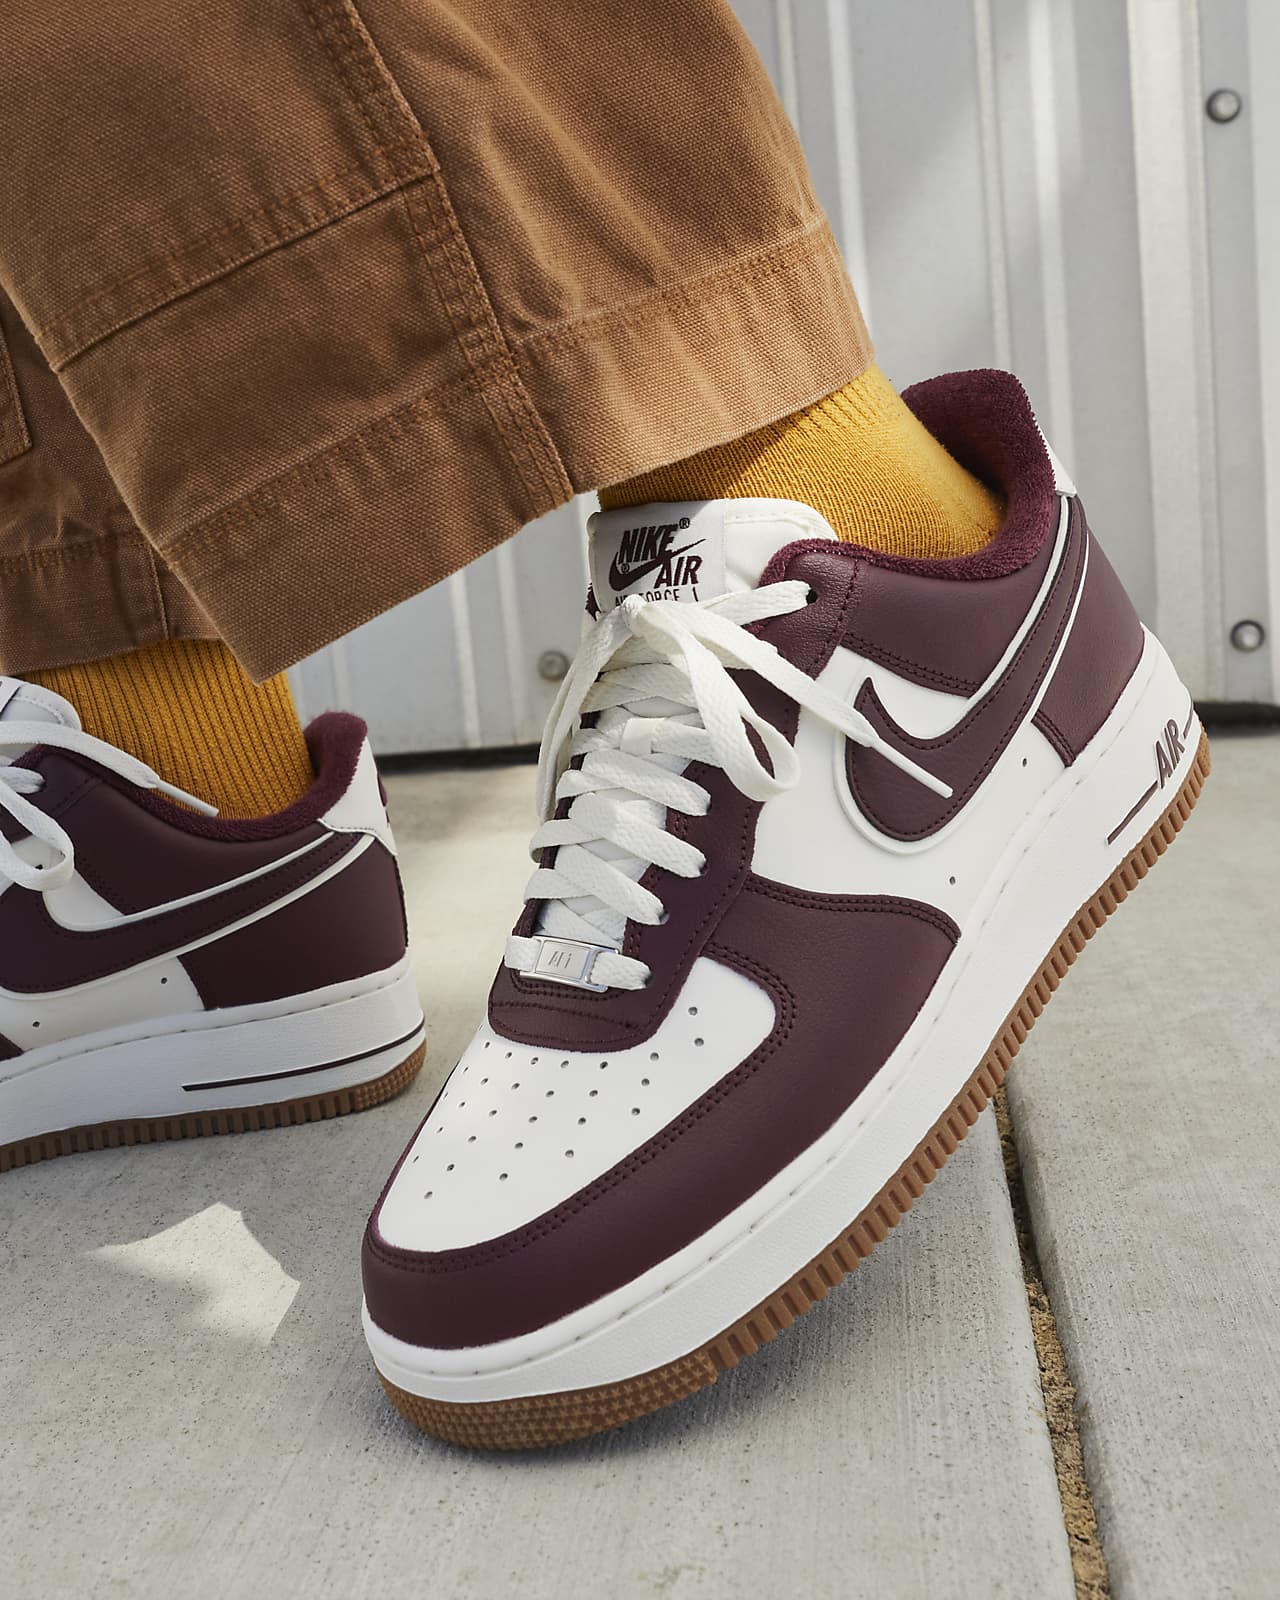 Nike White And Burgundy Air Force 1 07 Lv8 4 Sneakers for Men